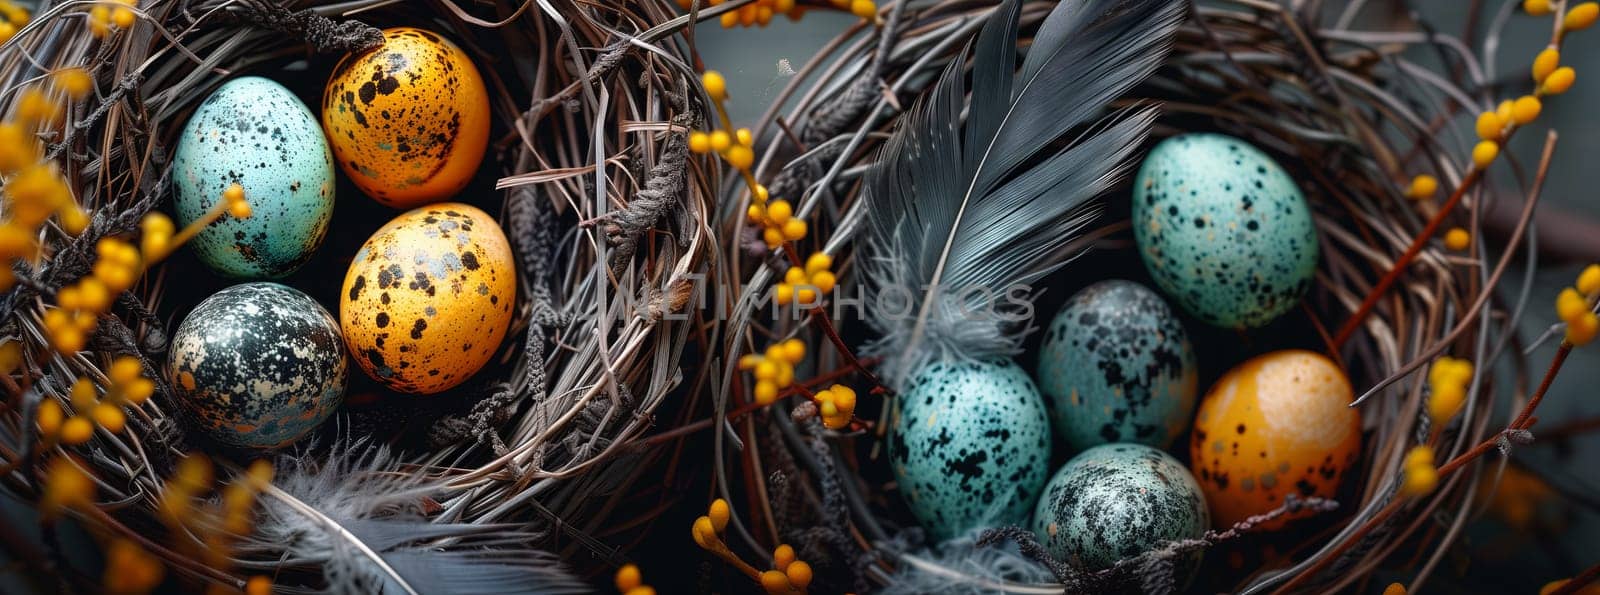 A bird nest filled with eggs and feathers, surrounded by a Terrestrial plant of the Cucurbita genus. The Calabaza vine provides natural foods like pumpkins, winter squash, and other vegetables